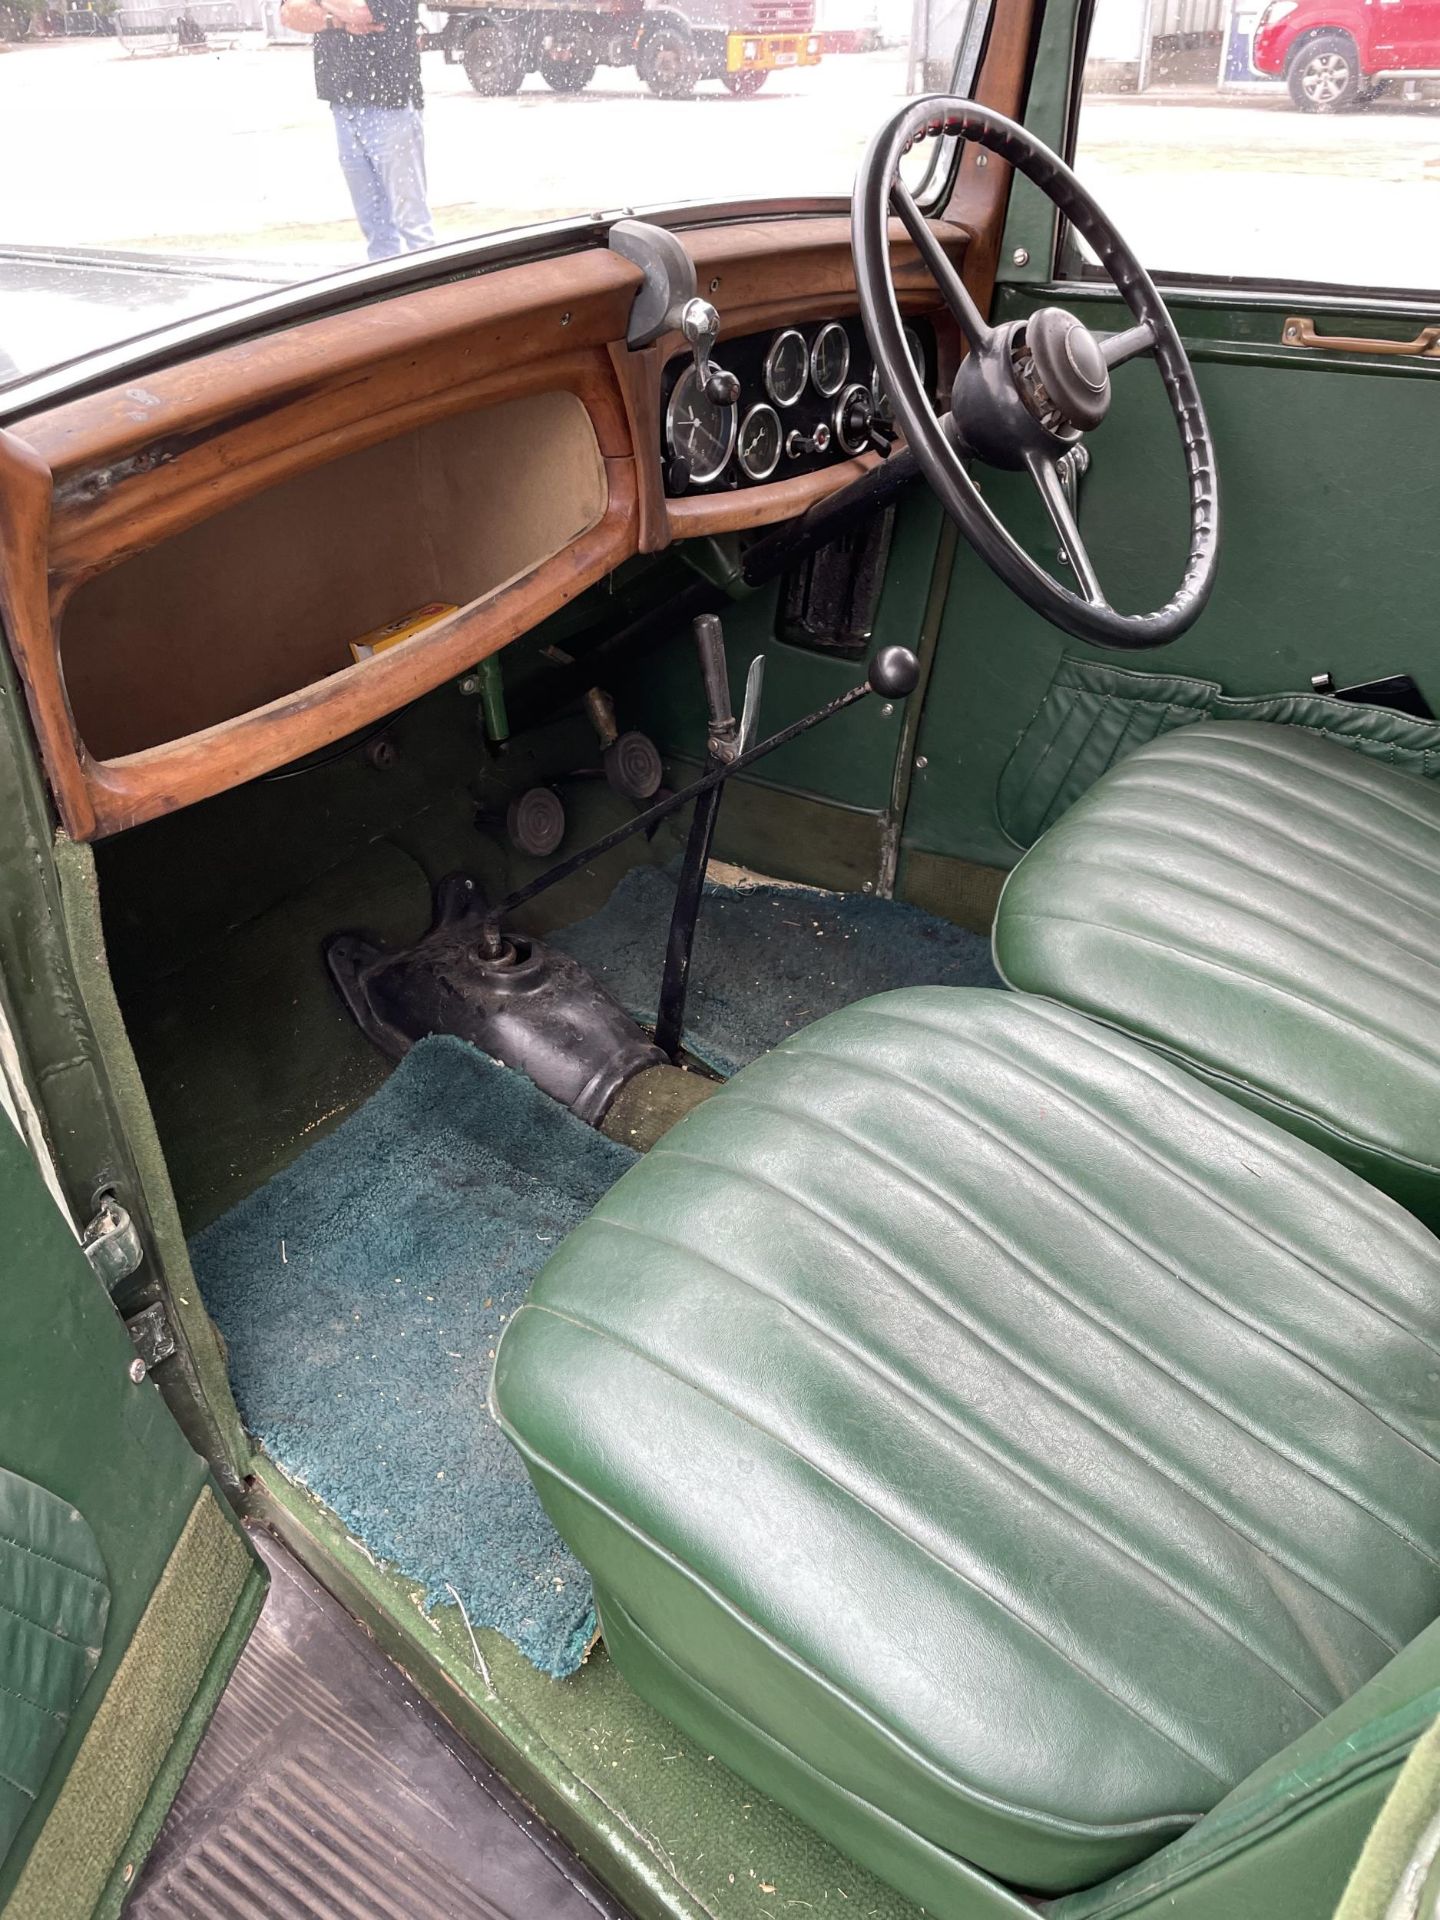 A 1935 AUSTIN 10 MOTOR CAR - REGISTRATION JU 7759, IN VERY GOOD CONDITION, STARTS AND RUNS, ON A V5C - Image 8 of 10